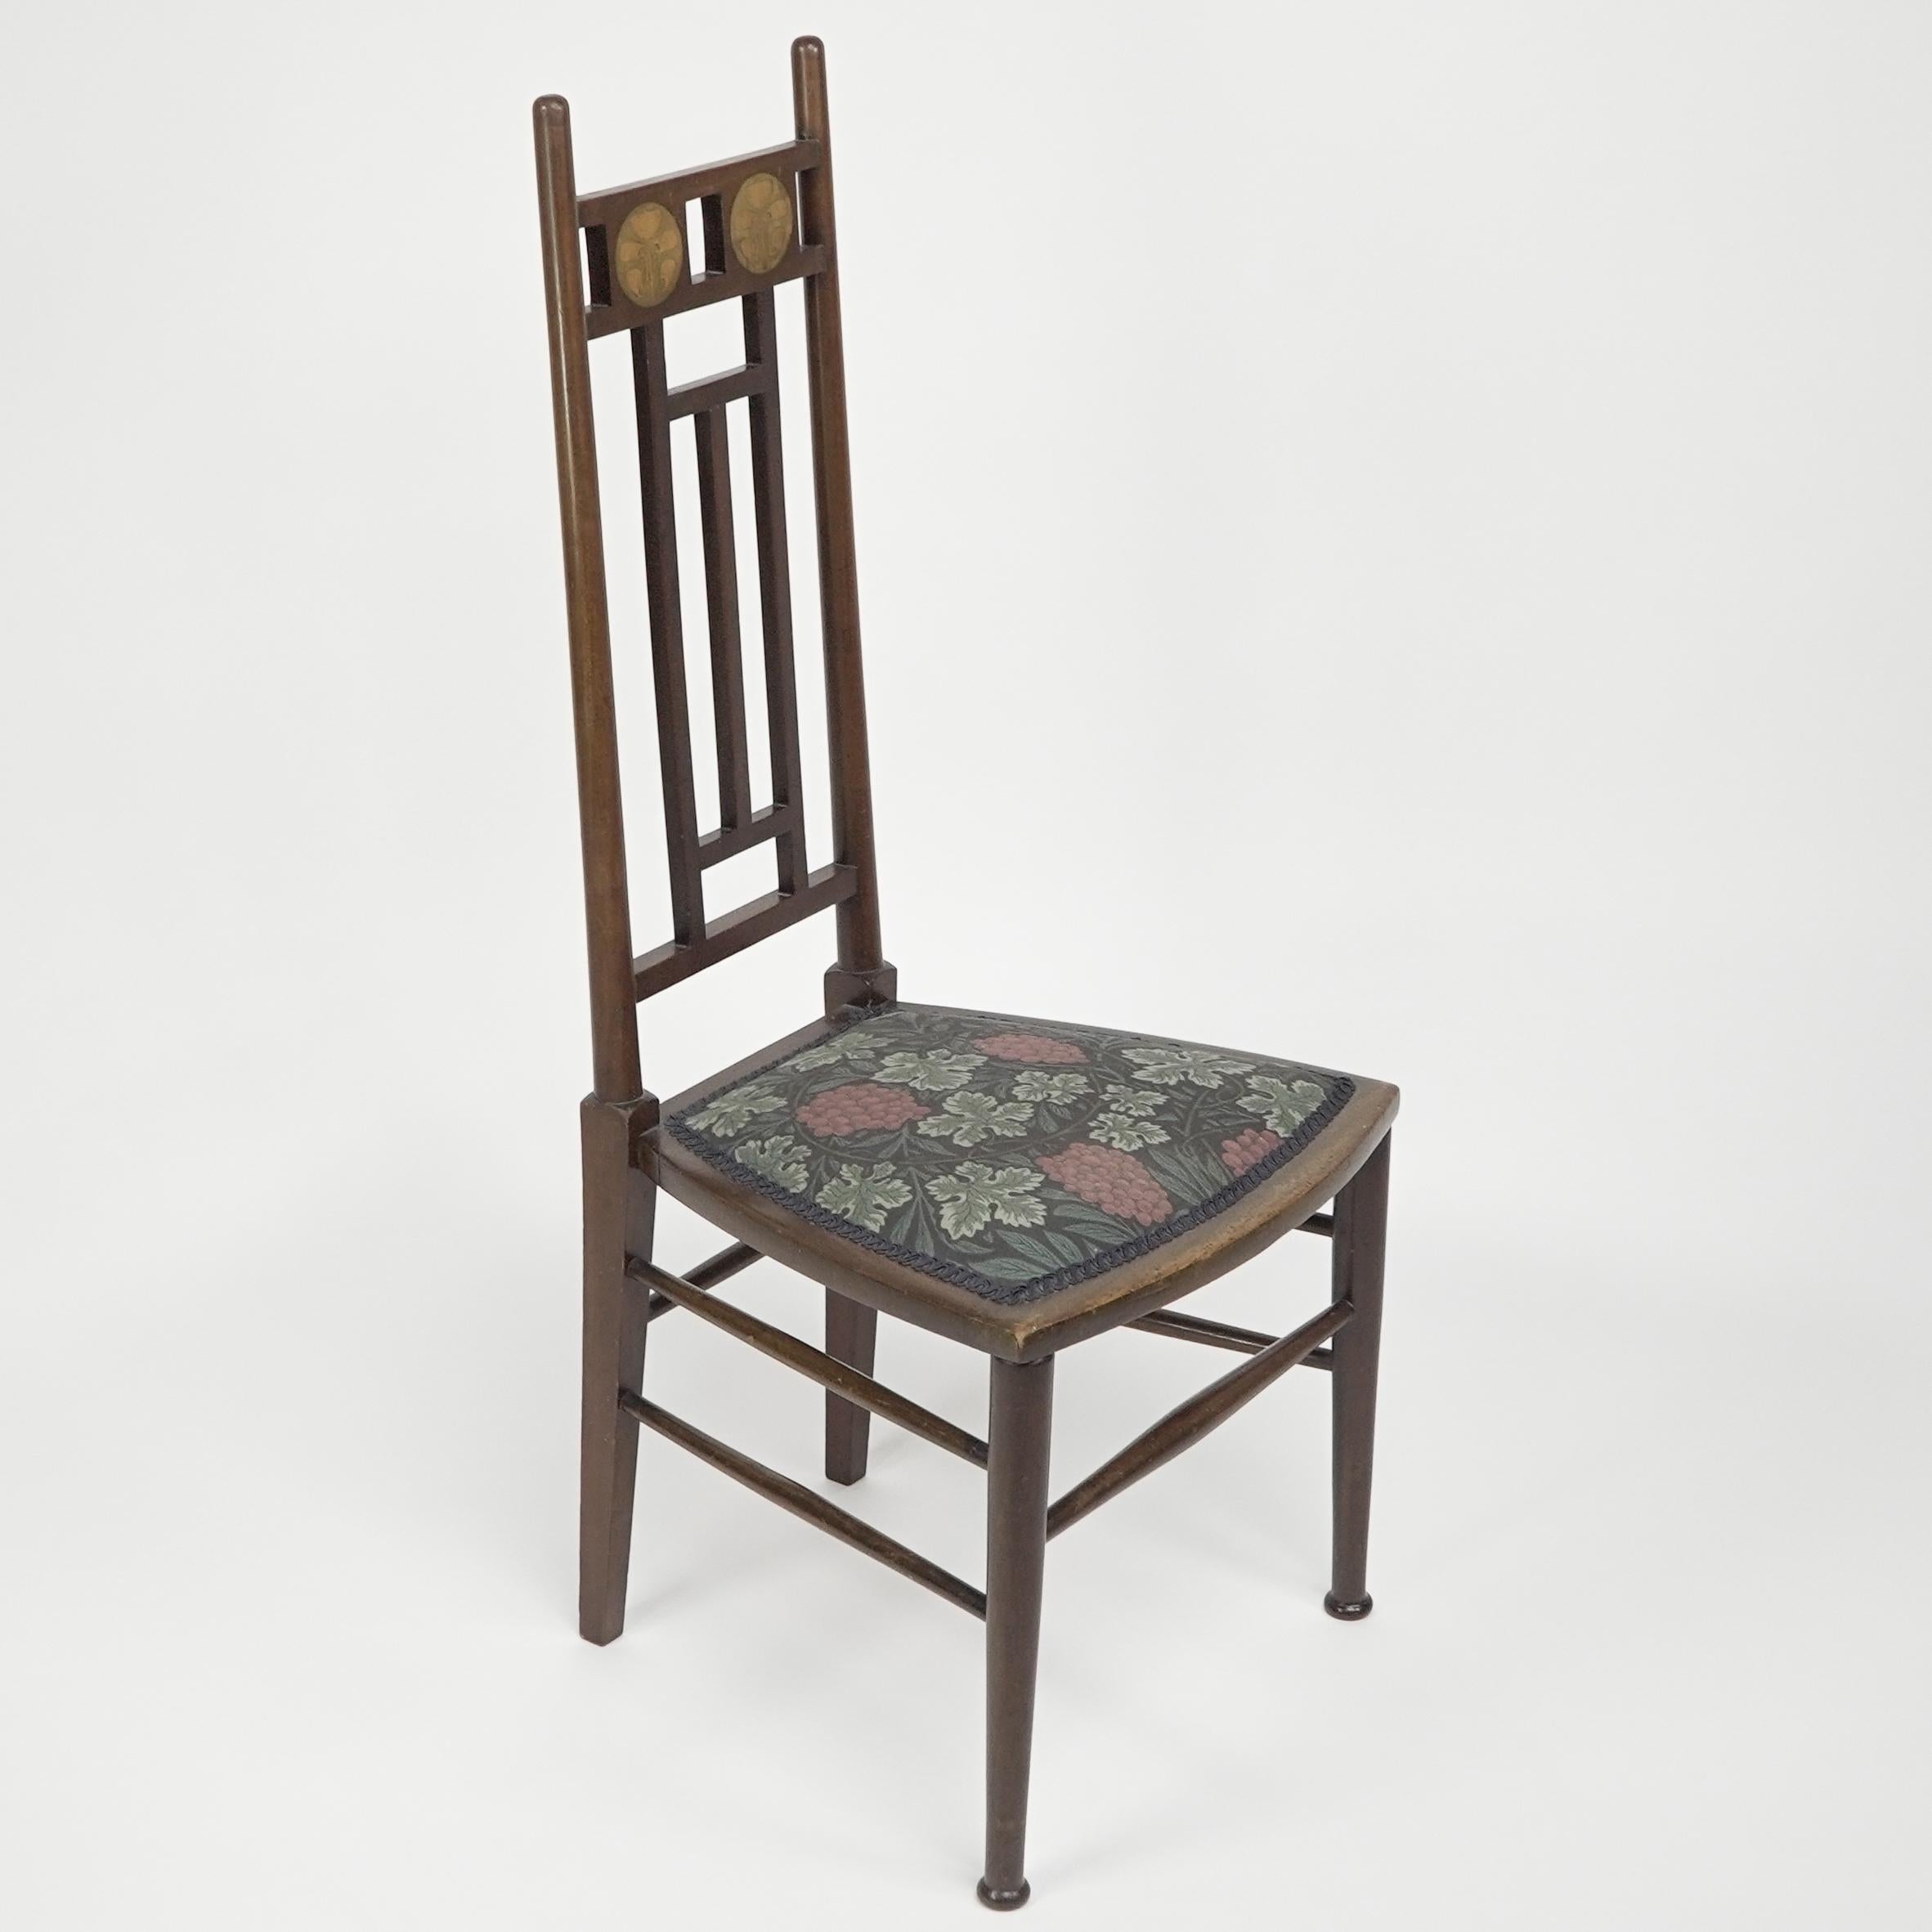 E G Punnett for Liberty & Co, made by William Birch. A Walnut side chair with circular floral sycamore and boxwood inlays to the back.
